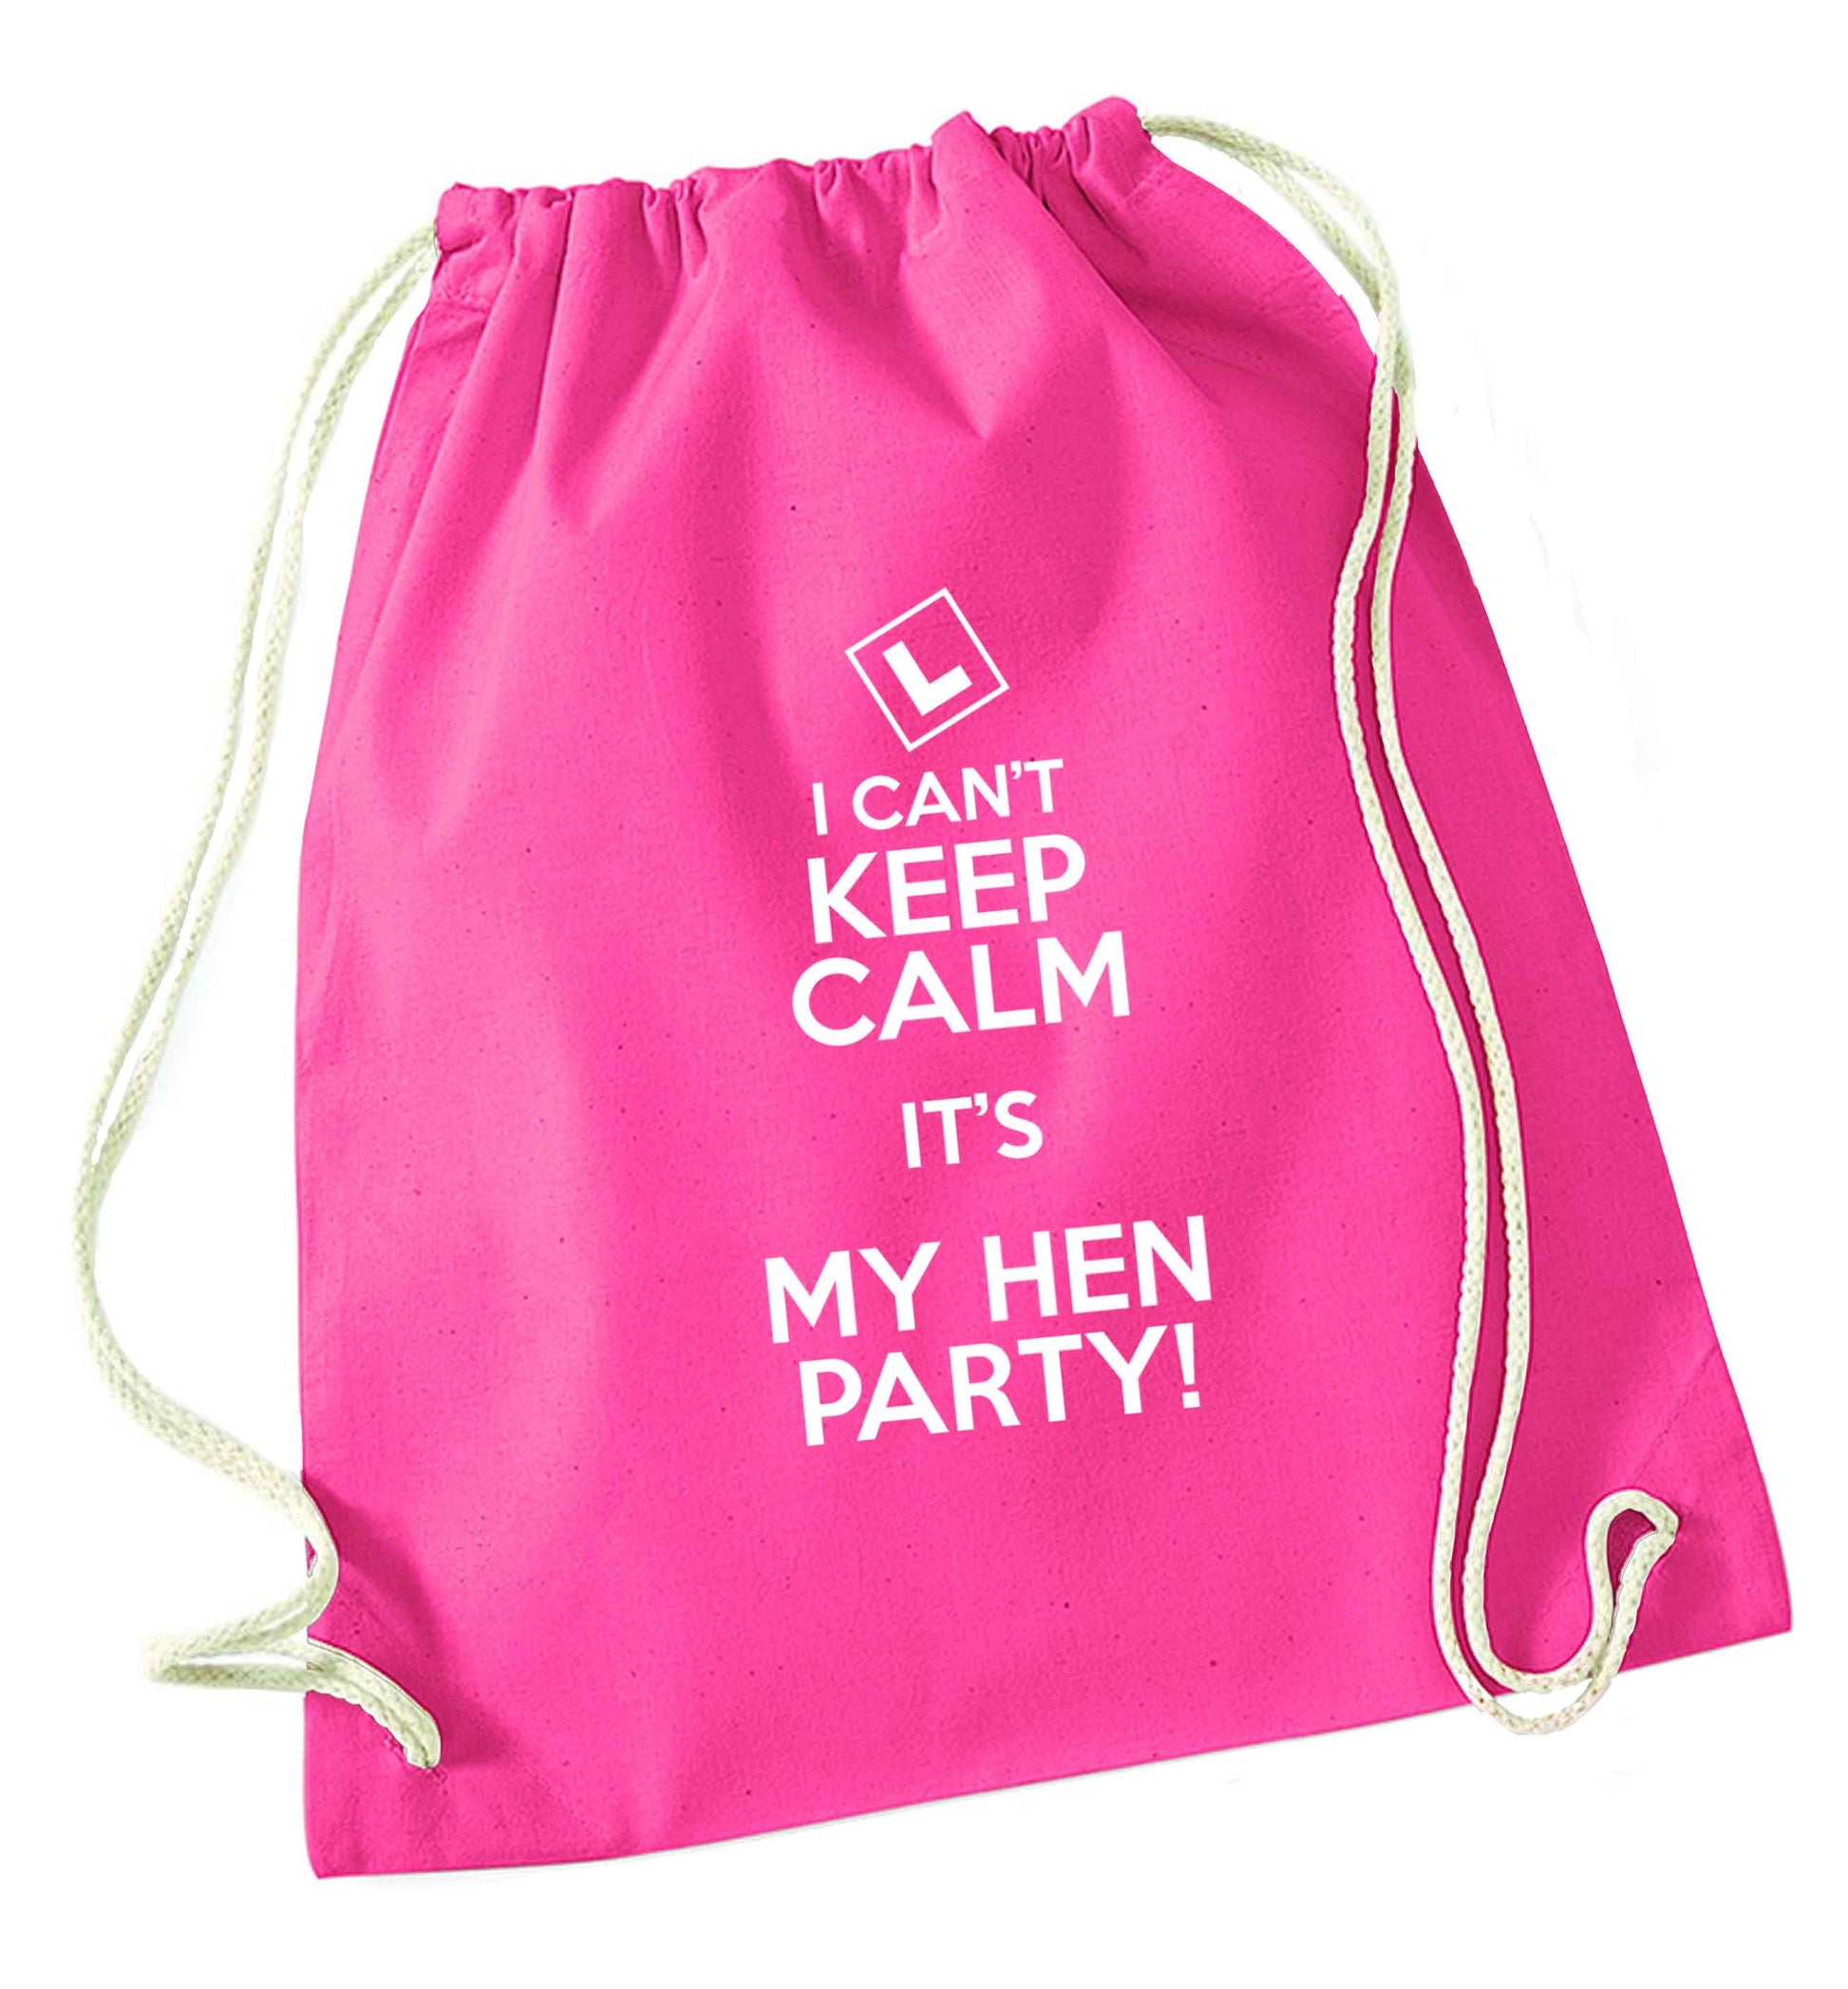 I can't keep calm it's my hen party pink drawstring bag